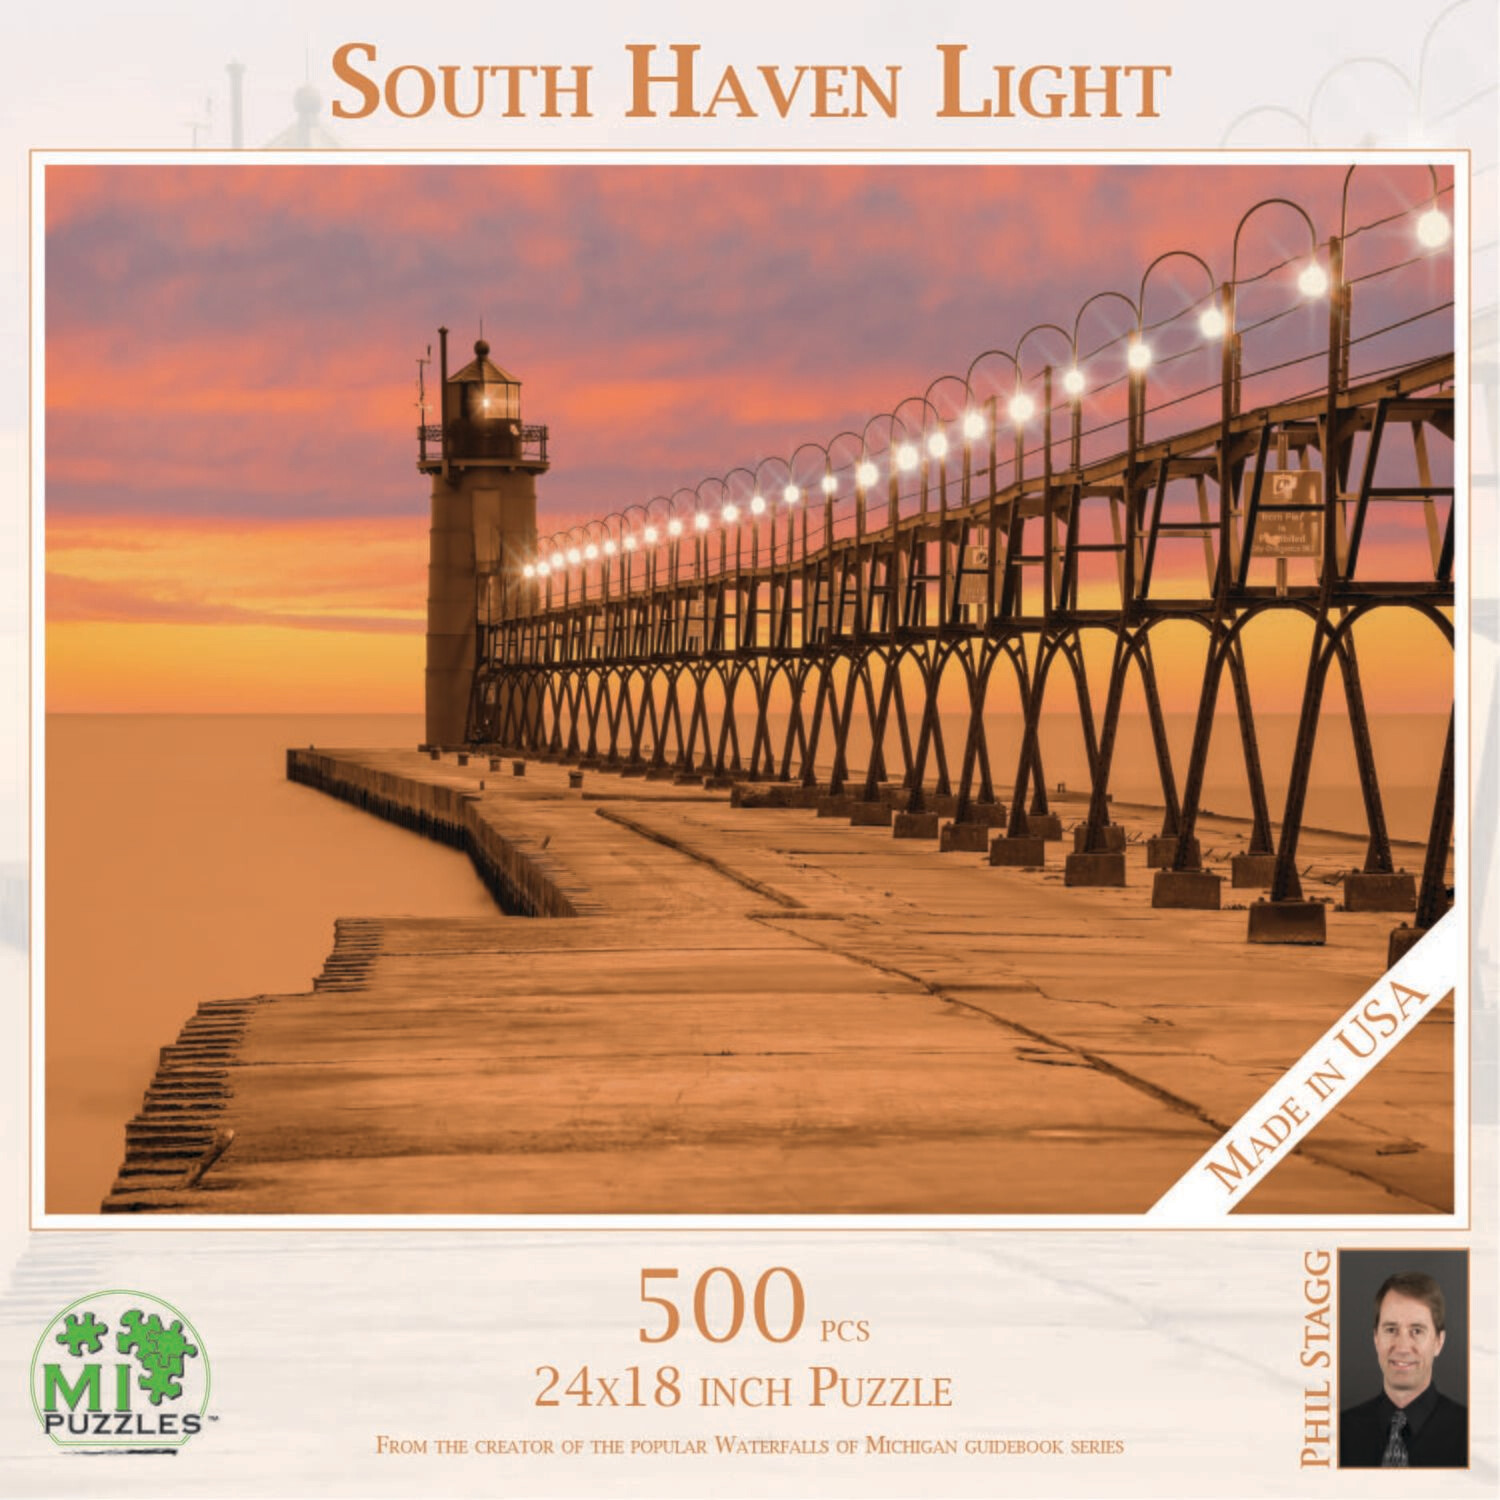 SOUTH HAVEN LIGHT